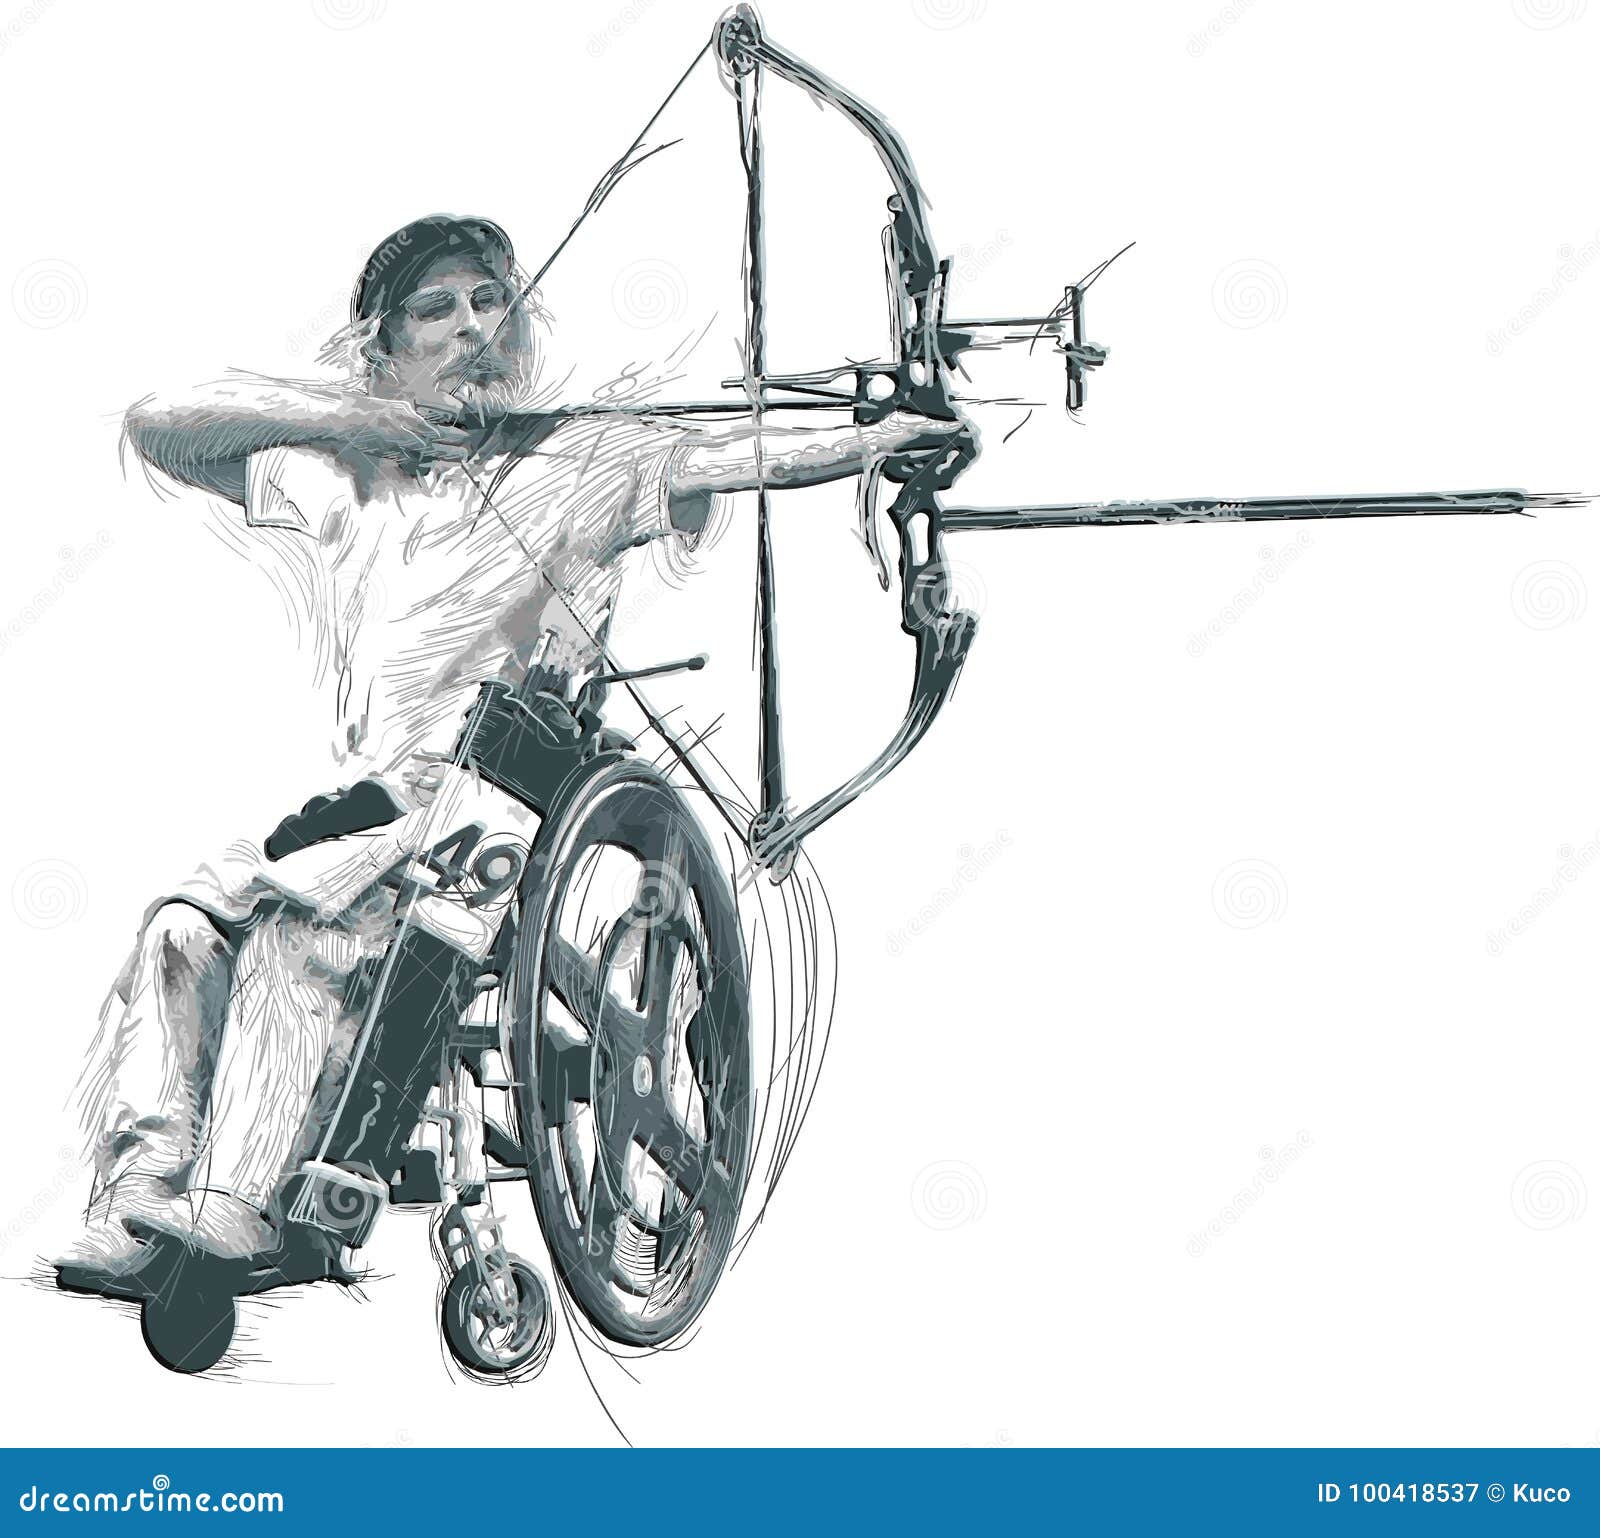 athletes with physical disabilities - archery